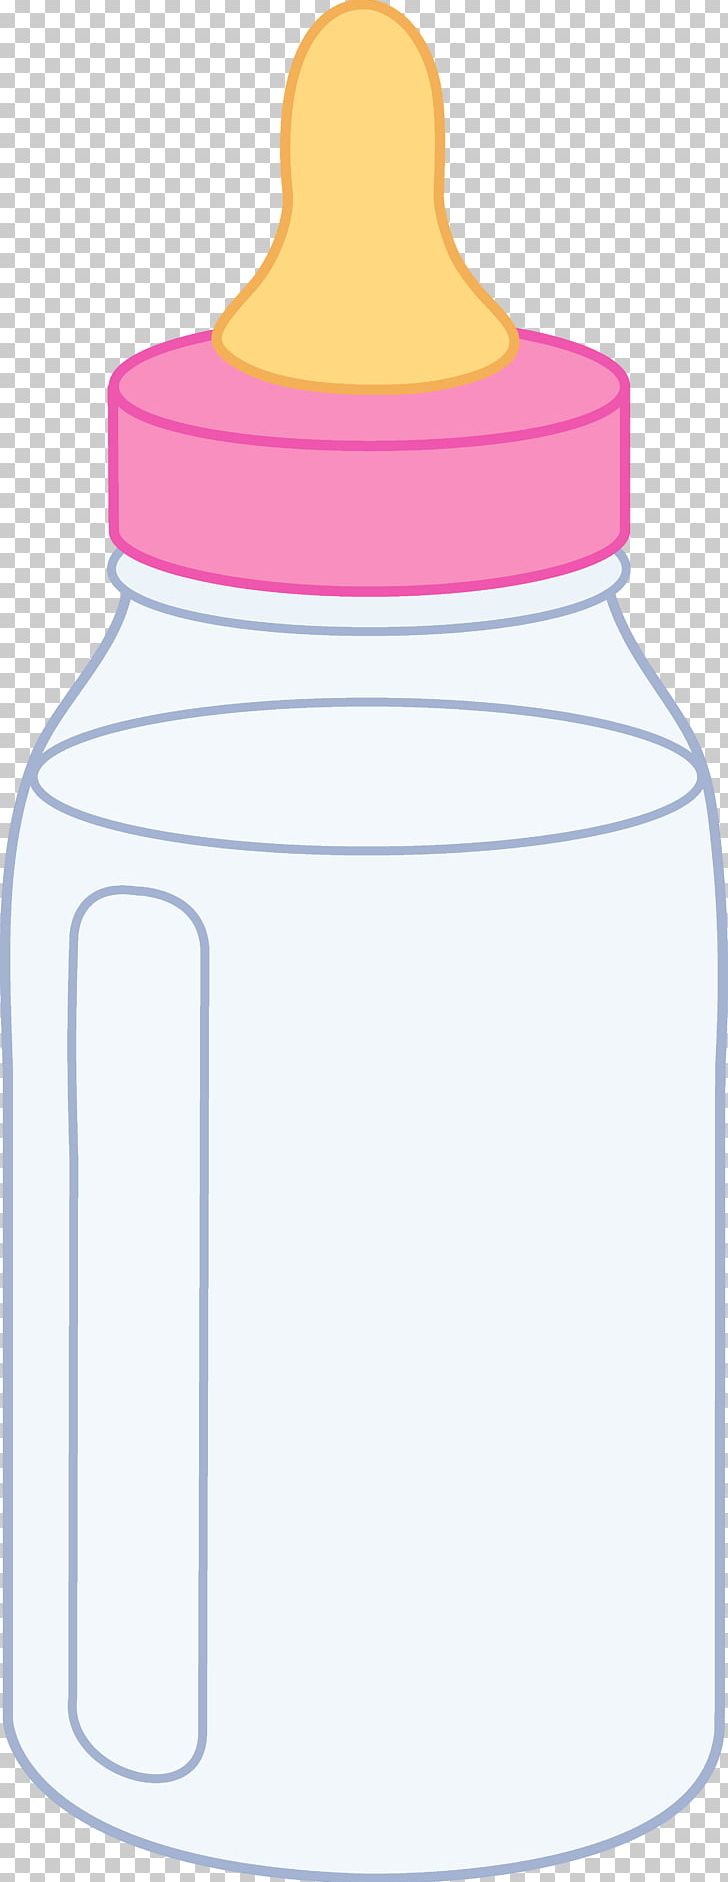 Baby Bottle Infant PNG, Clipart, Baby Bottle, Baby Bottles Images, Baby Formula, Baby Products, Baby Shower Free PNG Download